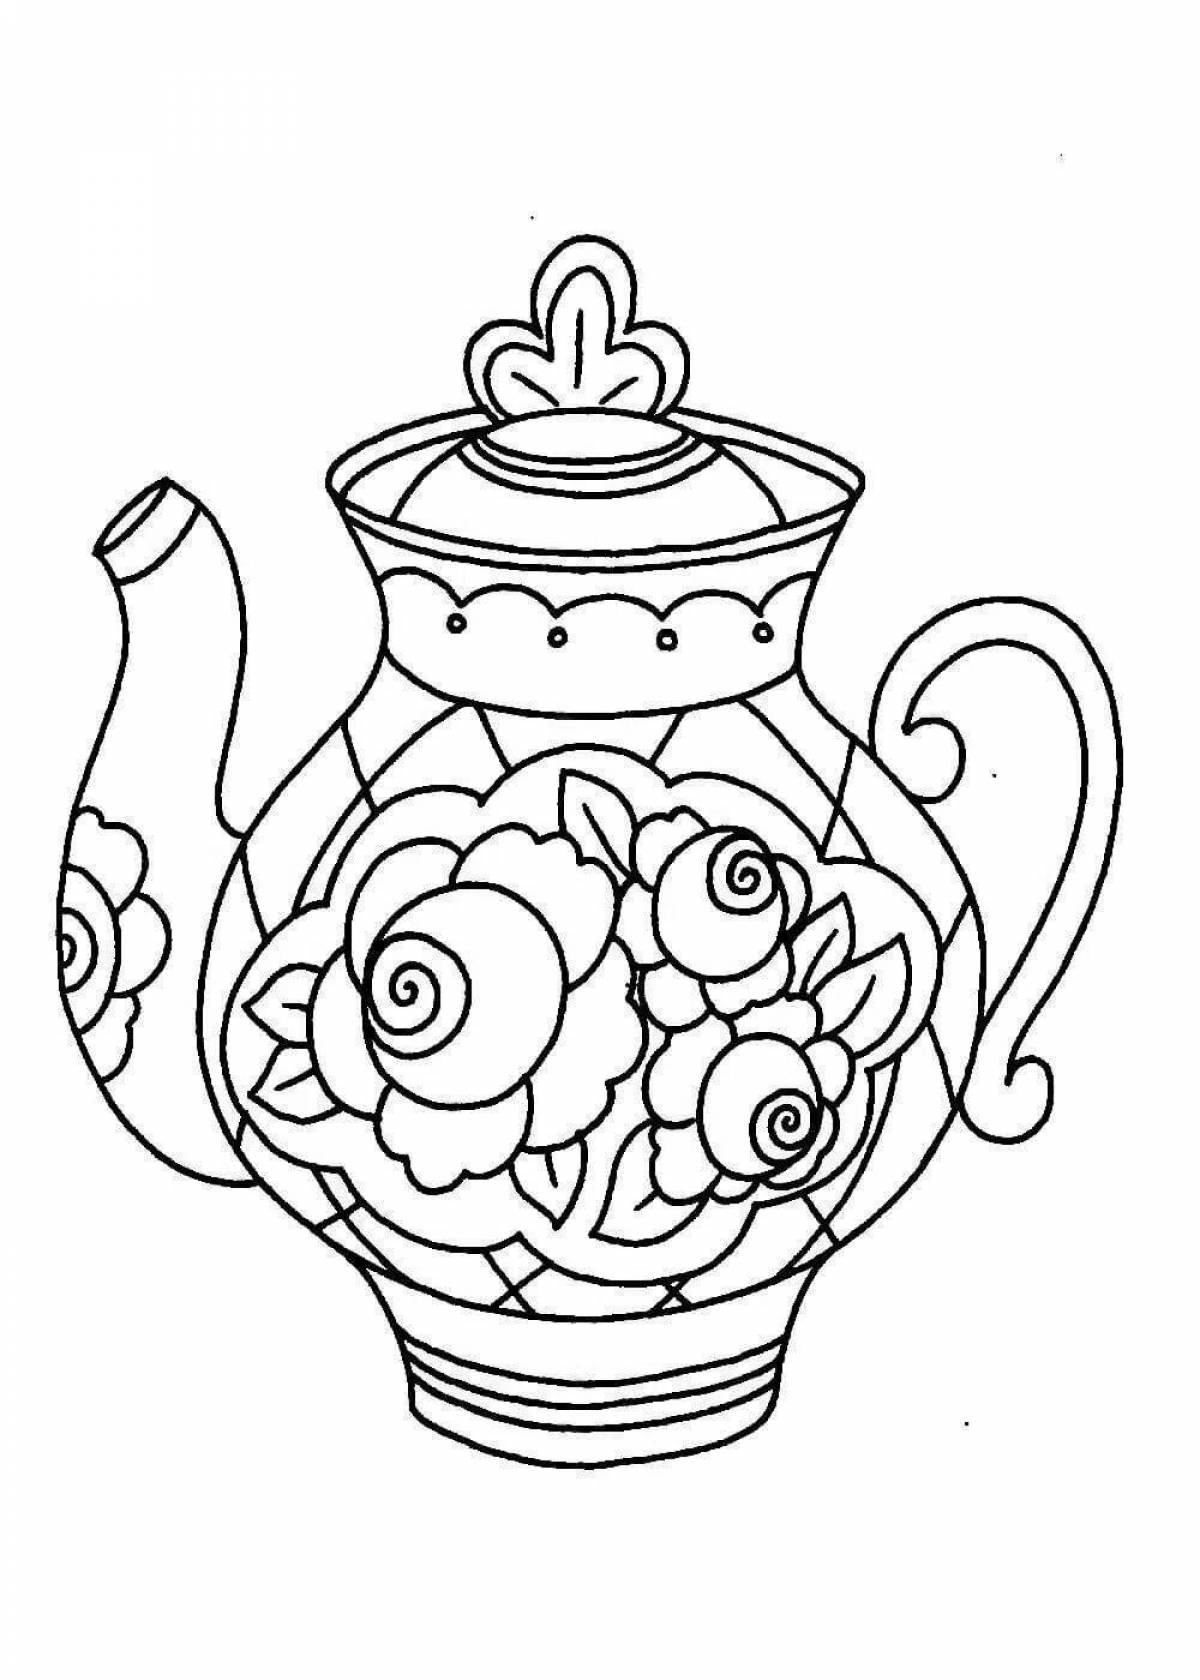 Gzhel exquisite mug coloring page